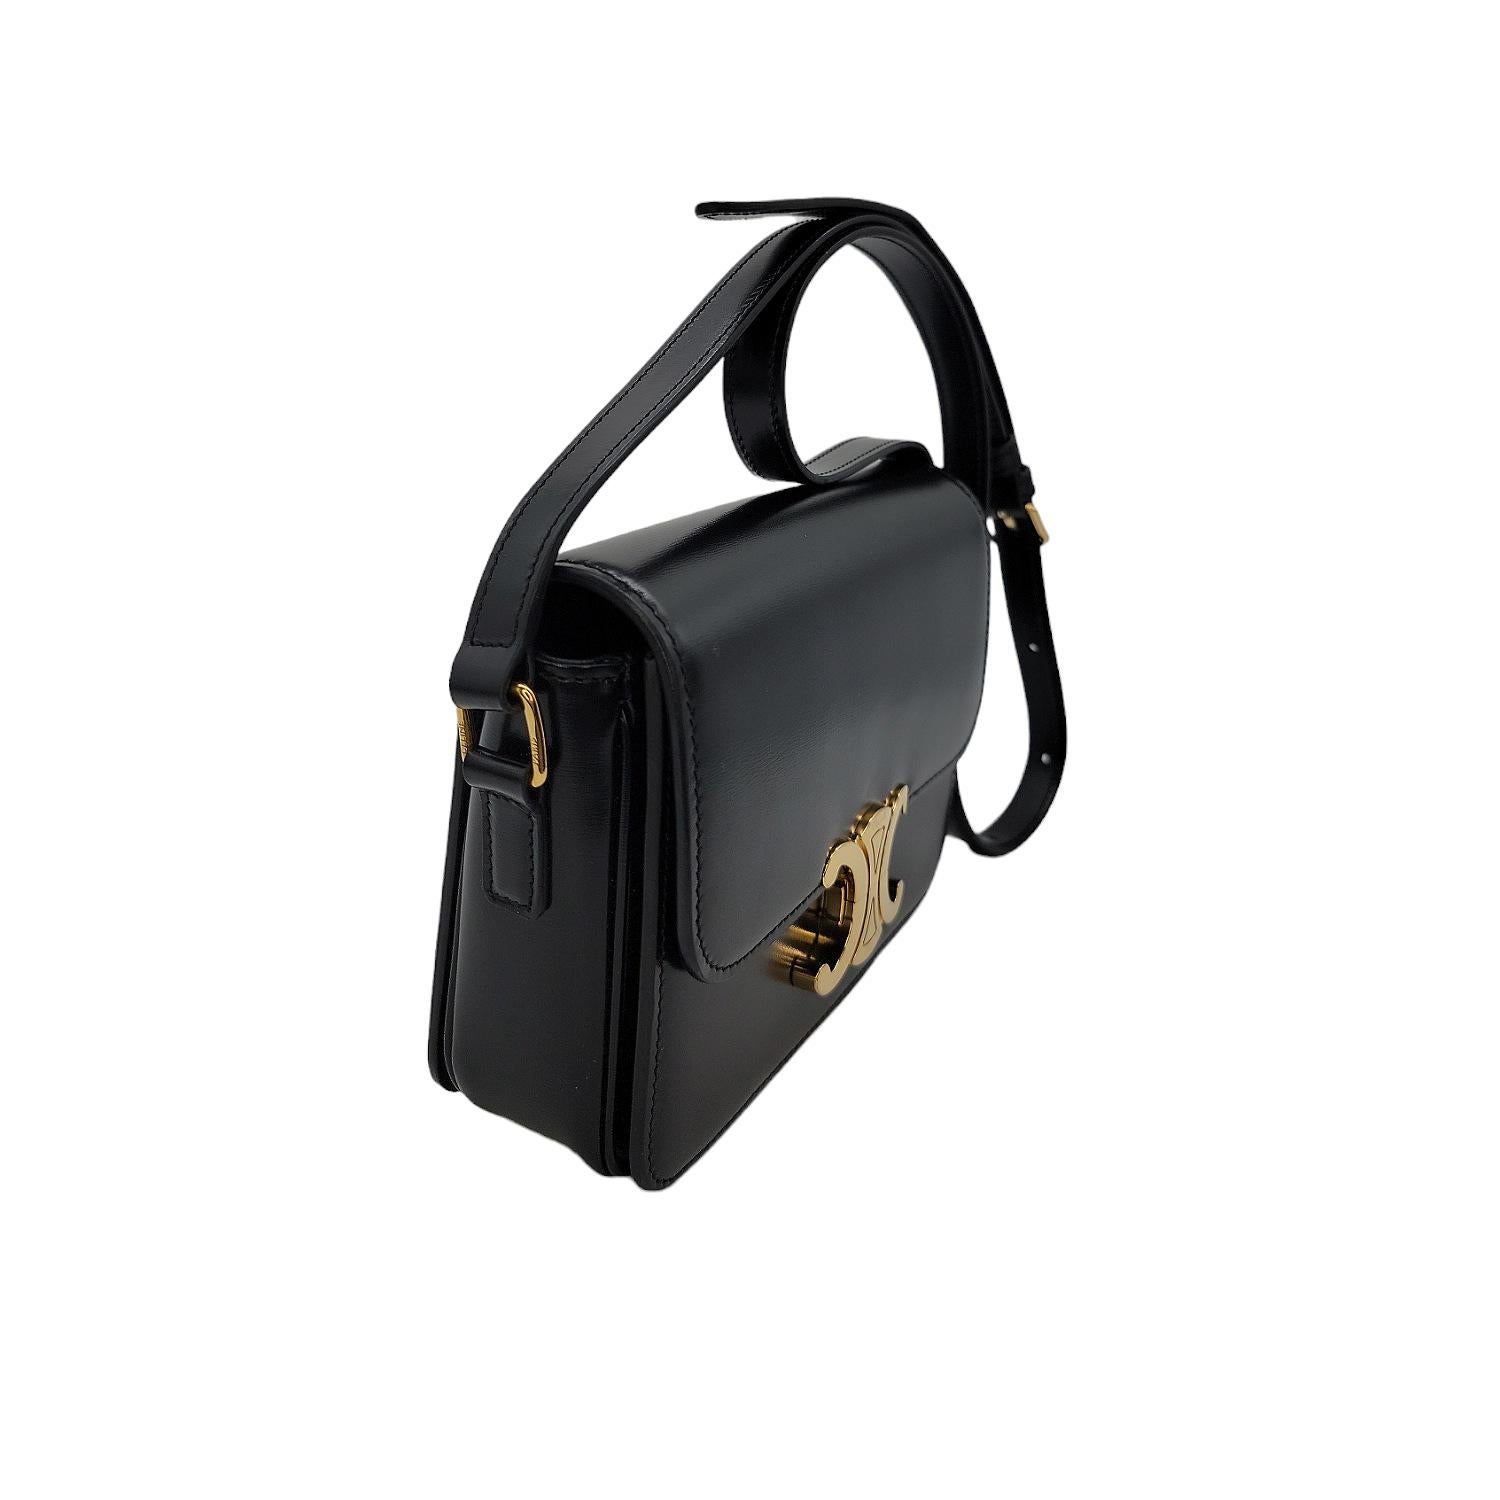 This Shiny Teen Triomphe Shoulder Bag is crafted of smooth calfskin leather in black. This bag features an adjustable leather shoulder strap with gold-tone hardware, and a matching gold-tone press latch on the crossover flap that opens to a